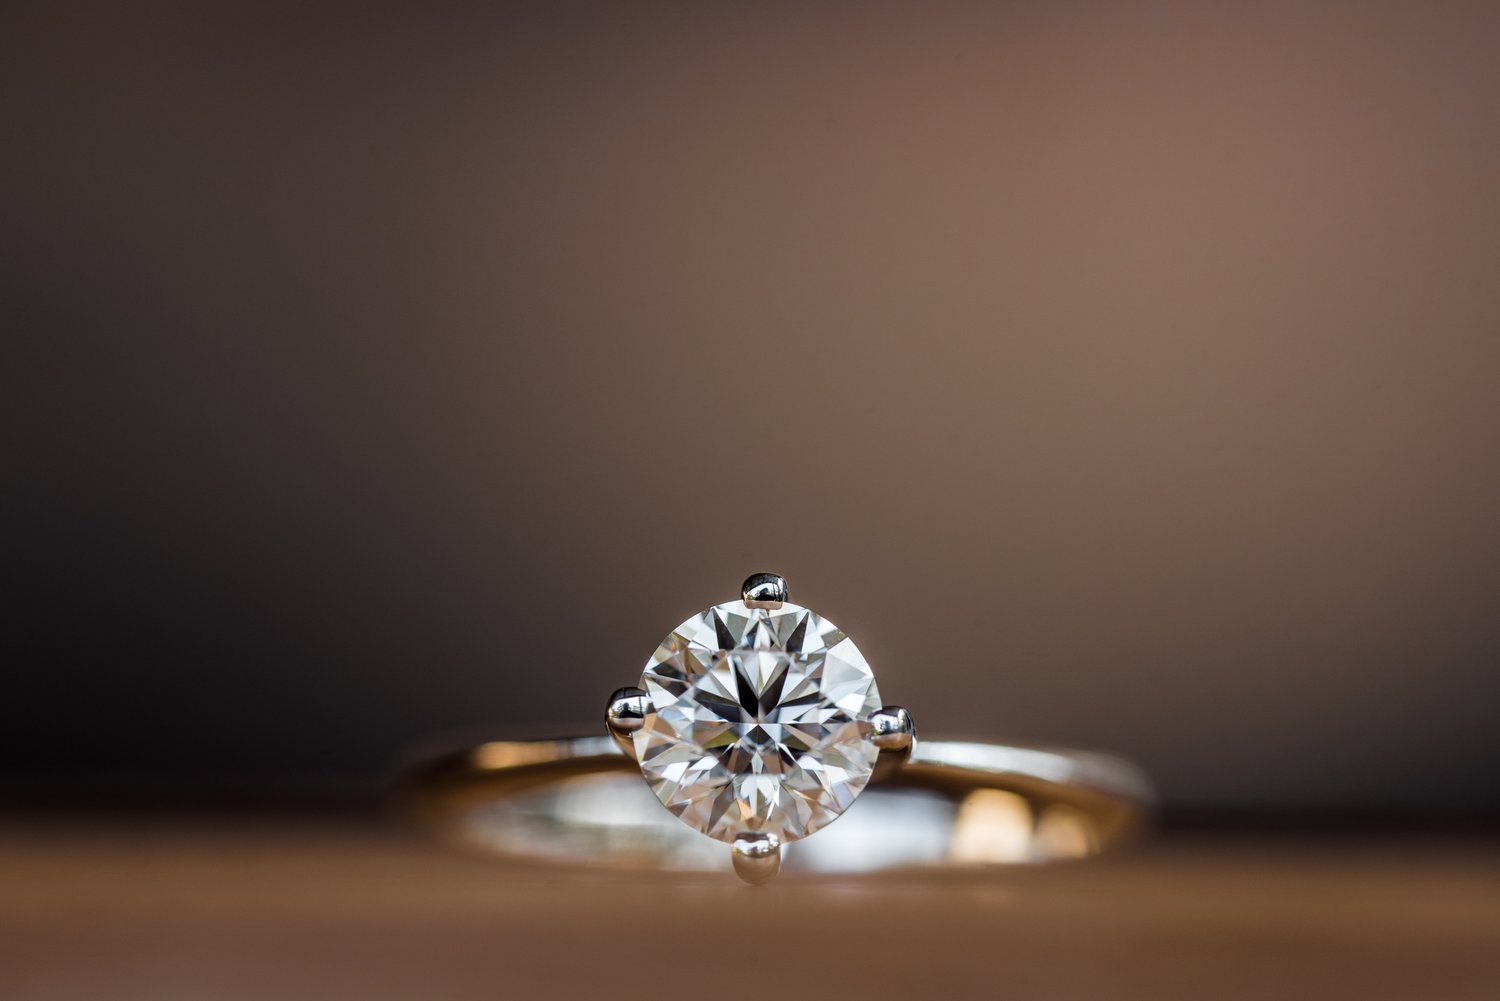 Best Advice to Choose Engagement Ring From Top Wedding Photographer in San Antonio, TX